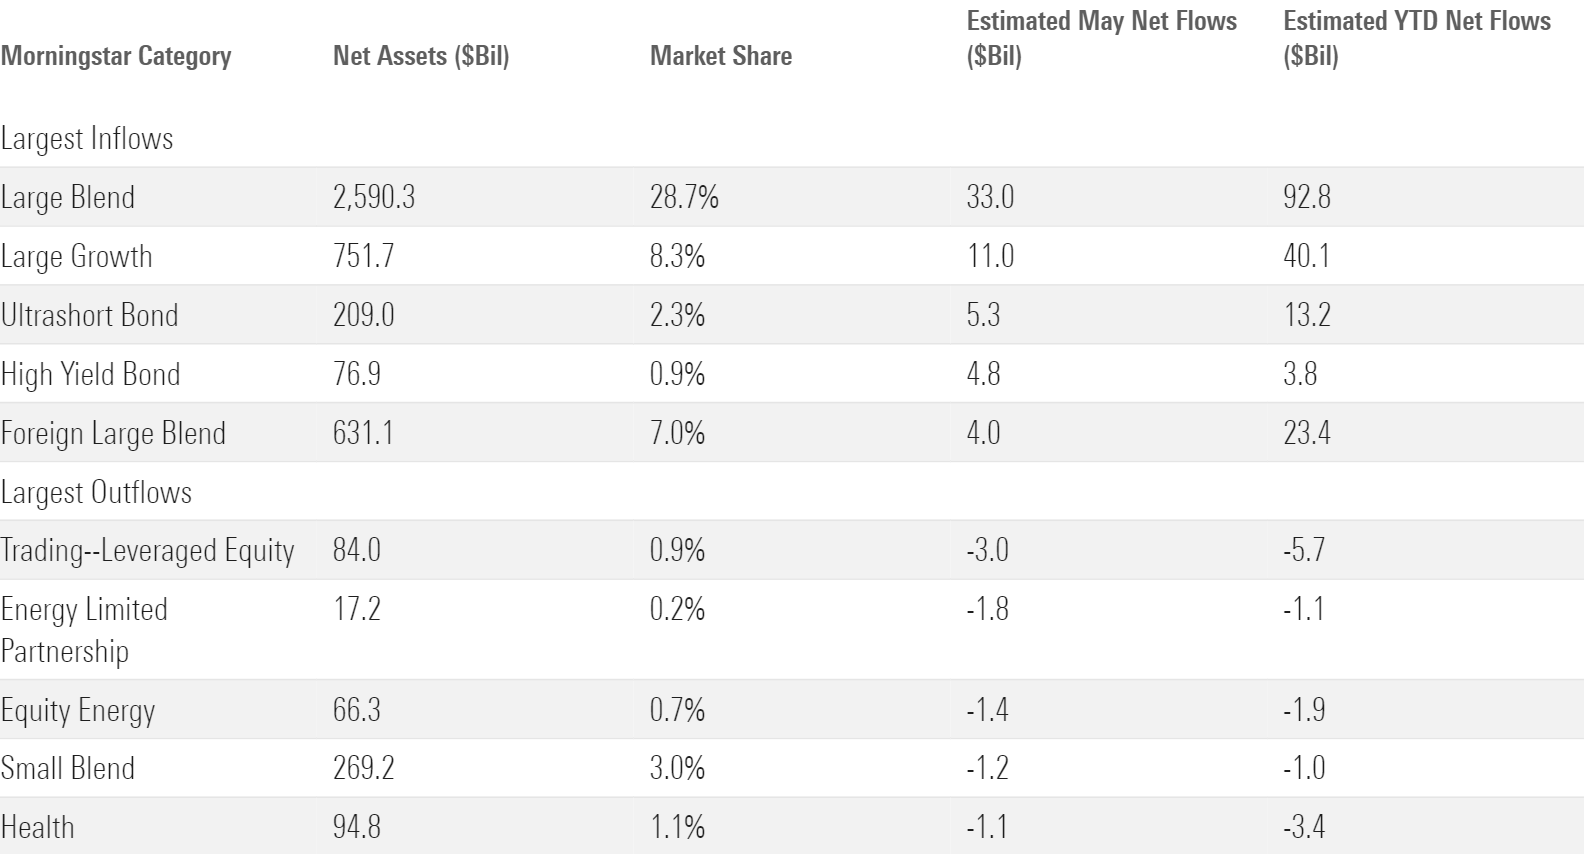 Table of Morningstar categories with largest ETF in and outflows.